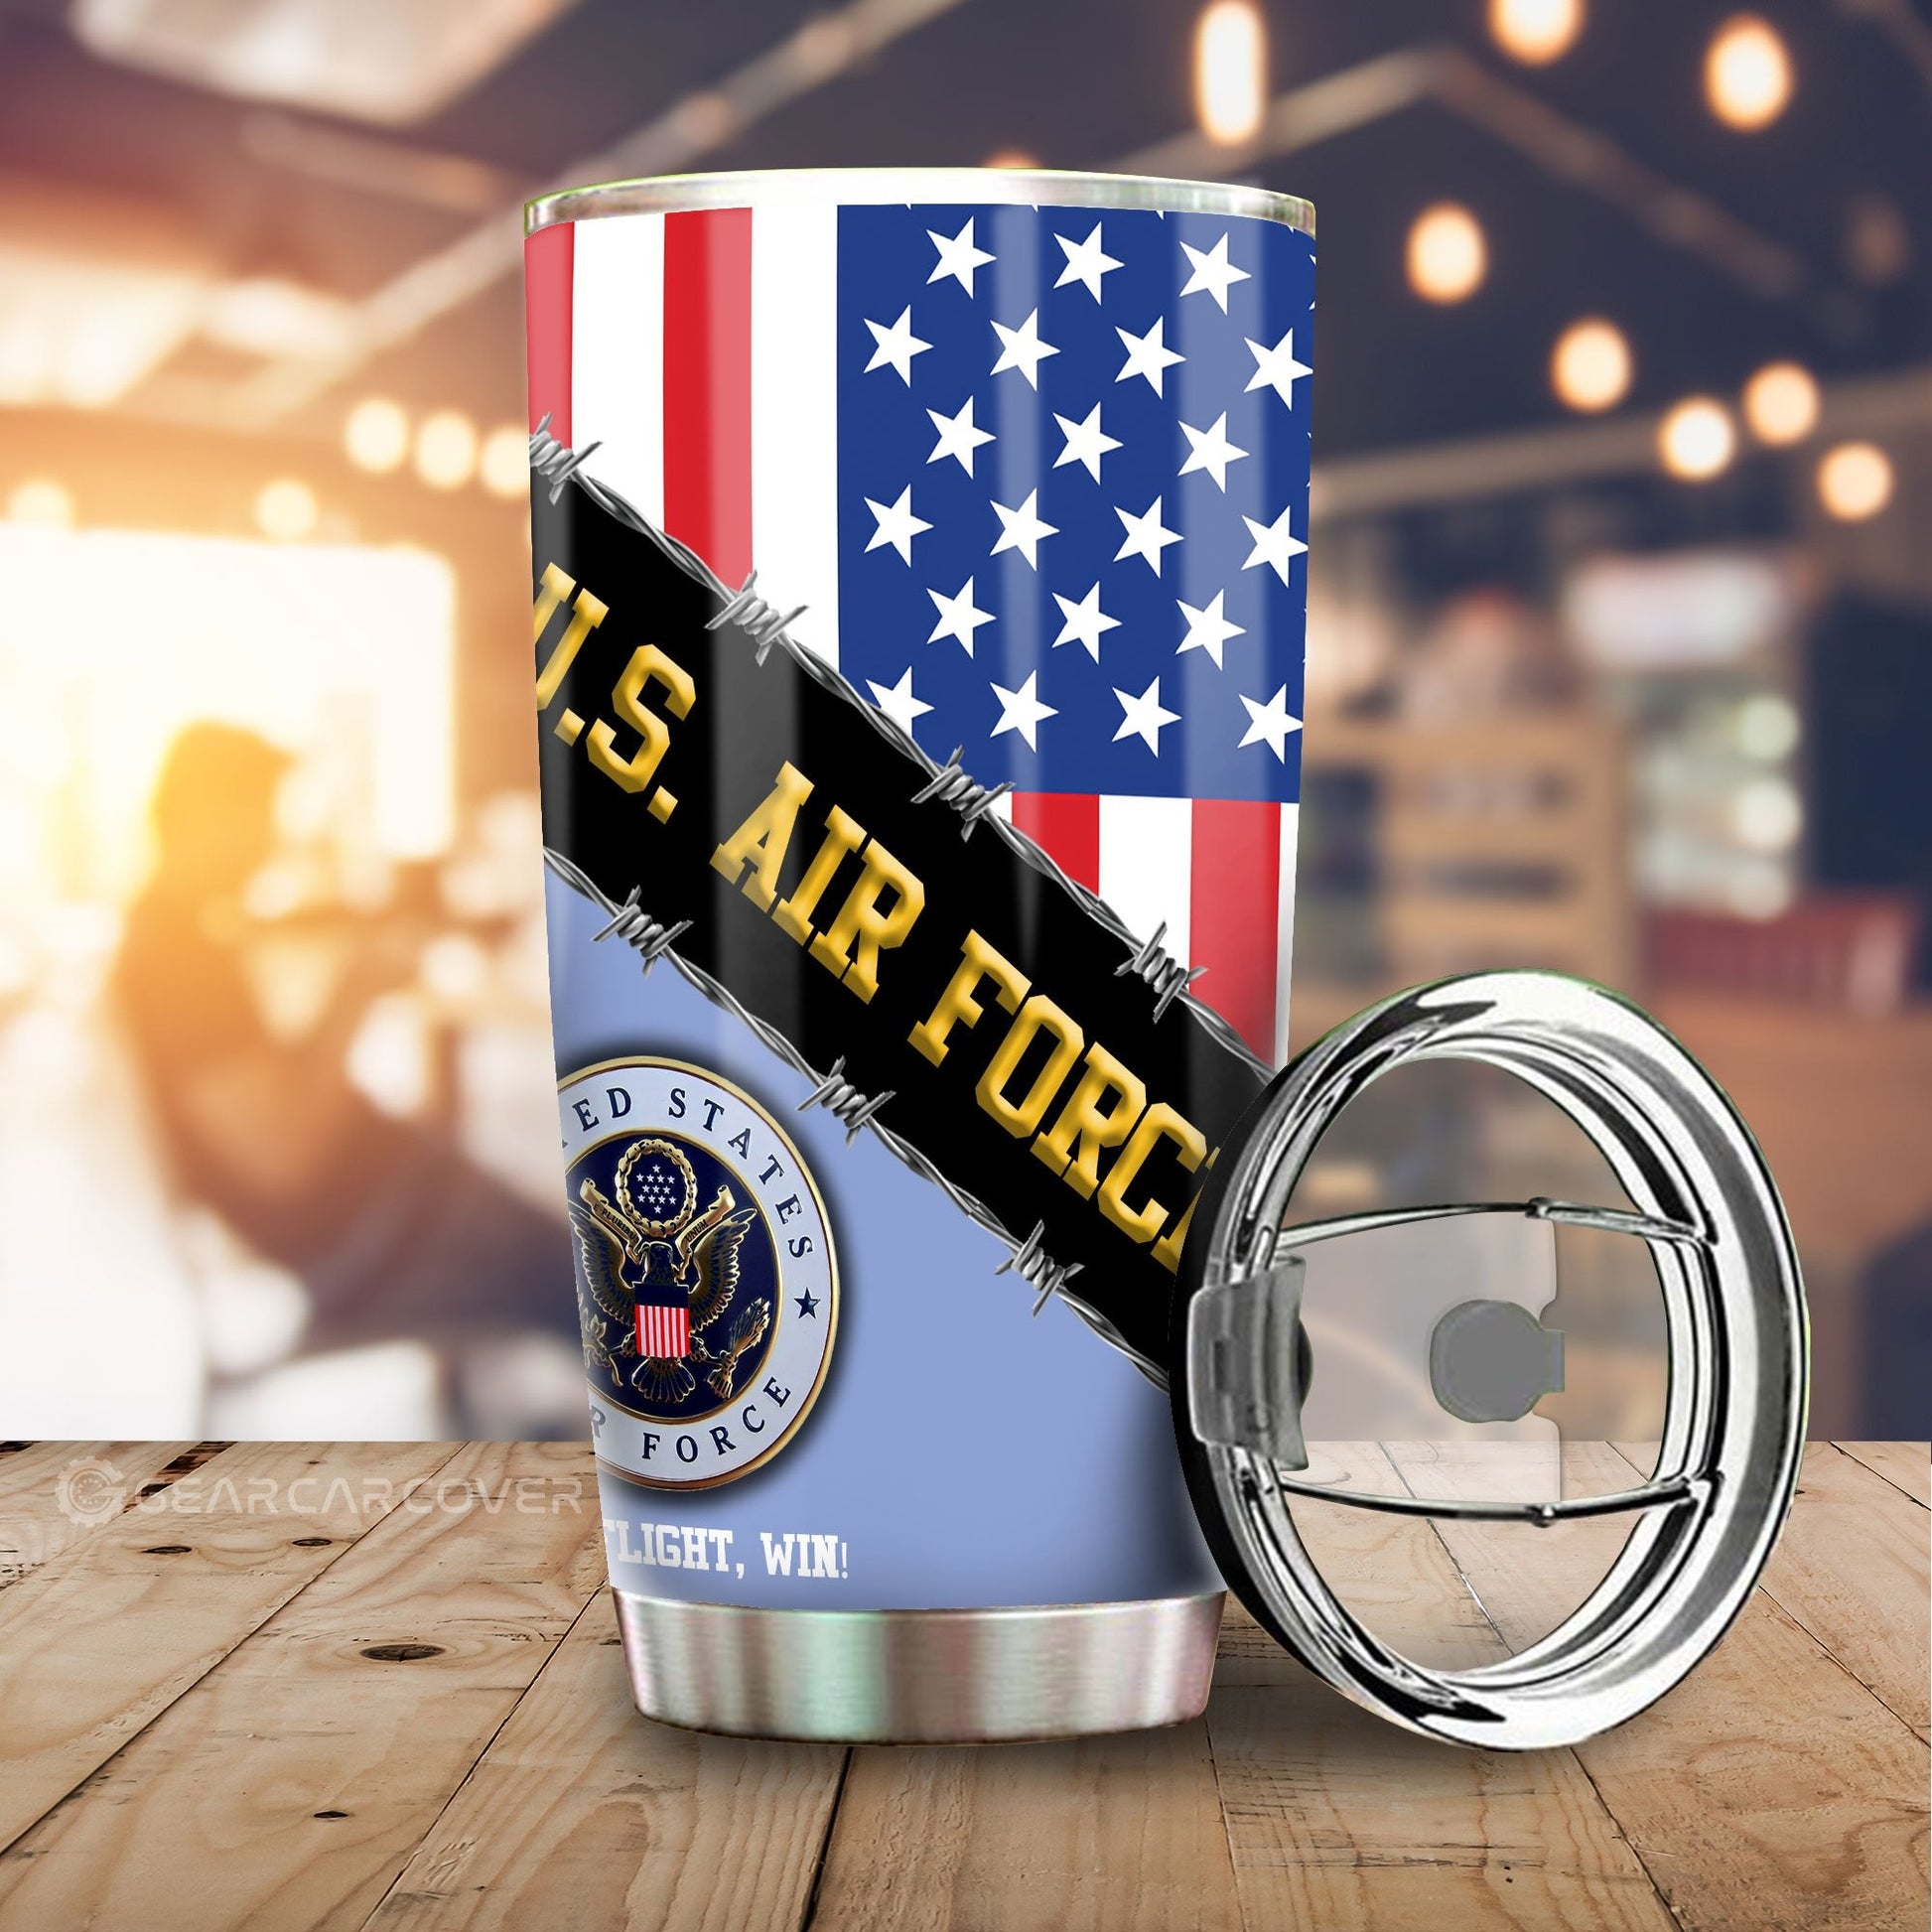 U.S. Air Force Tumbler Cup Custom United States Military Car Accessories - Gearcarcover - 1